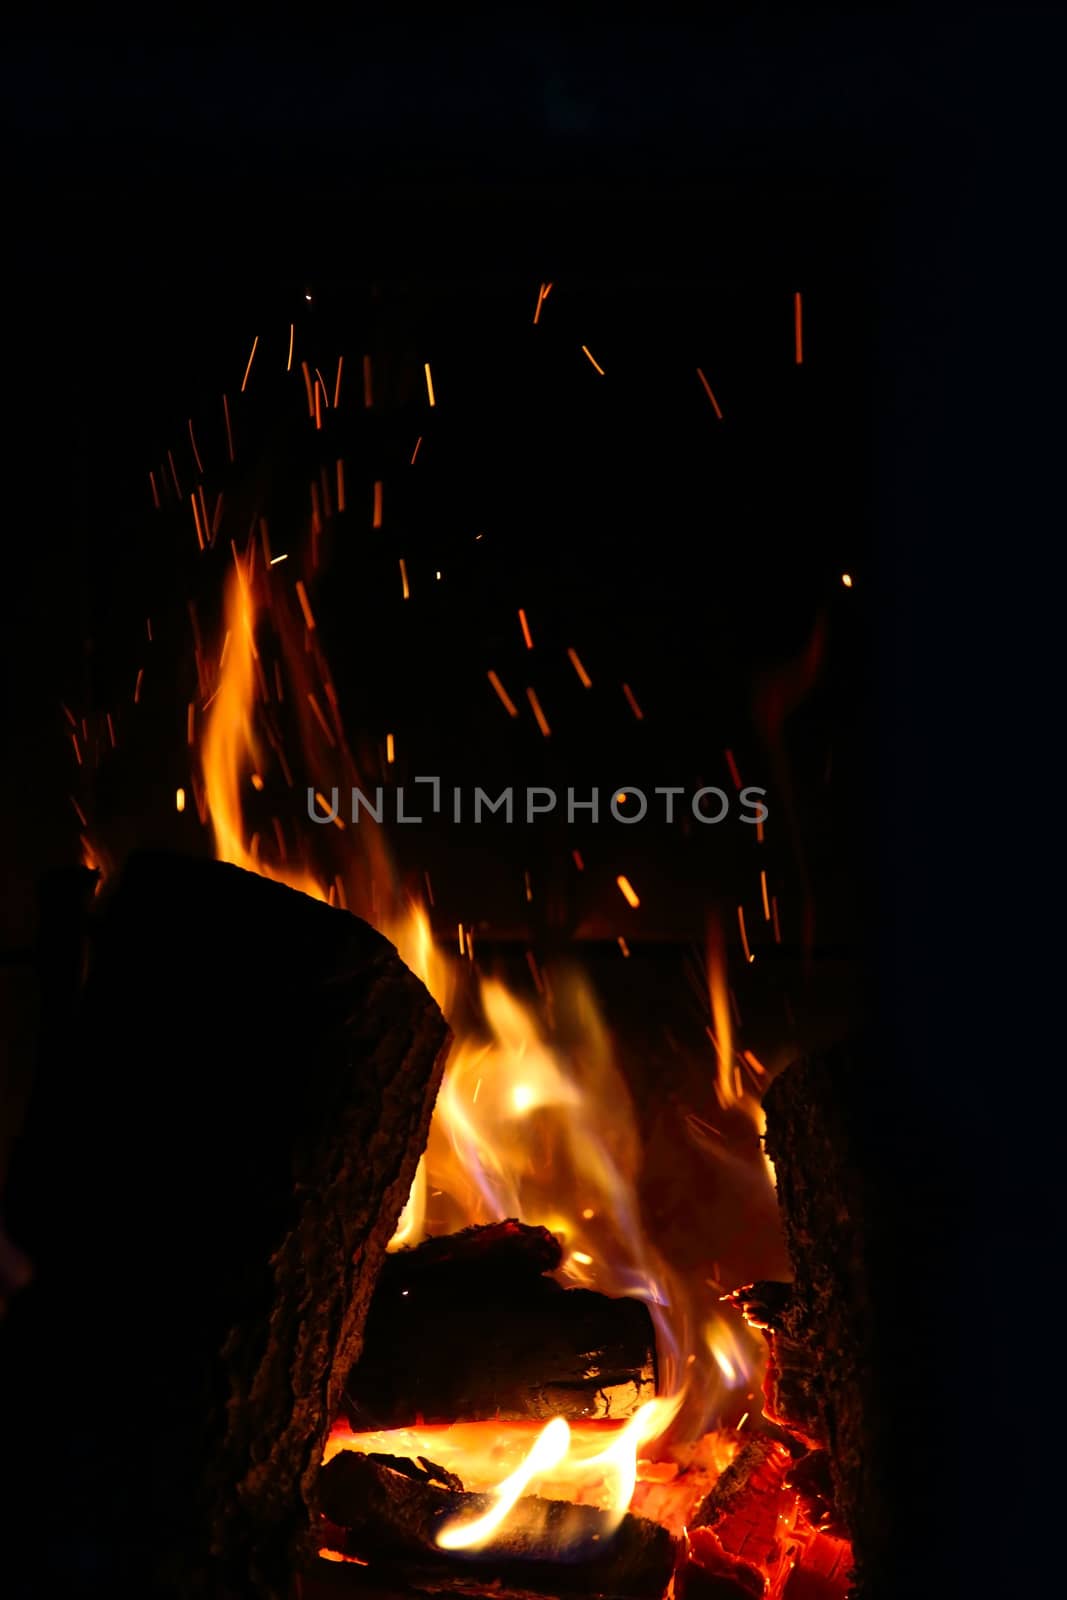 Crest of flame on burning wood in fireplace close up